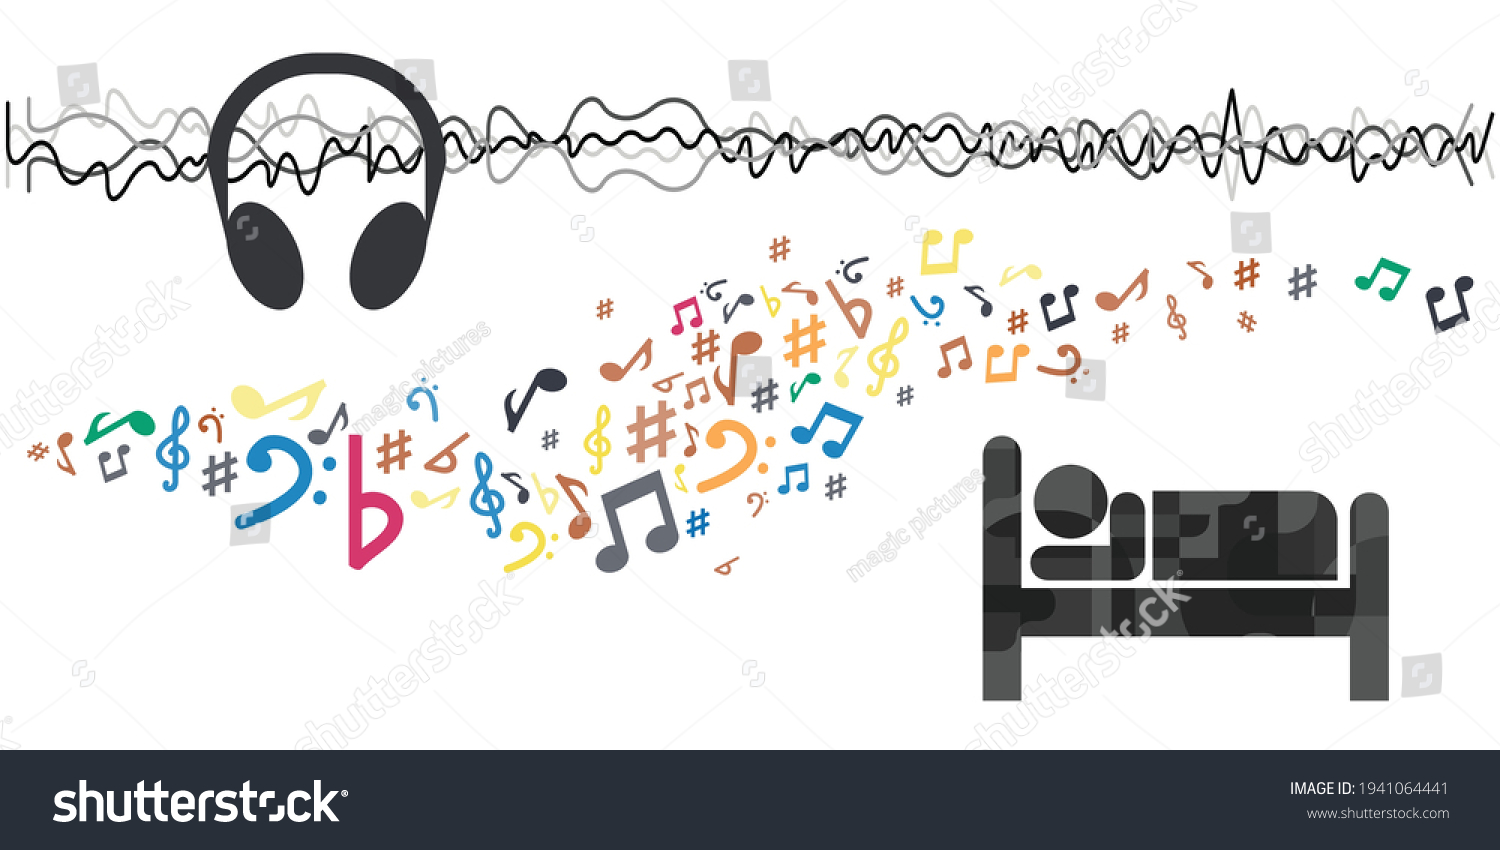 SVG of vector illustration of sleeping person and musical notes and headphones method against insomnia  svg